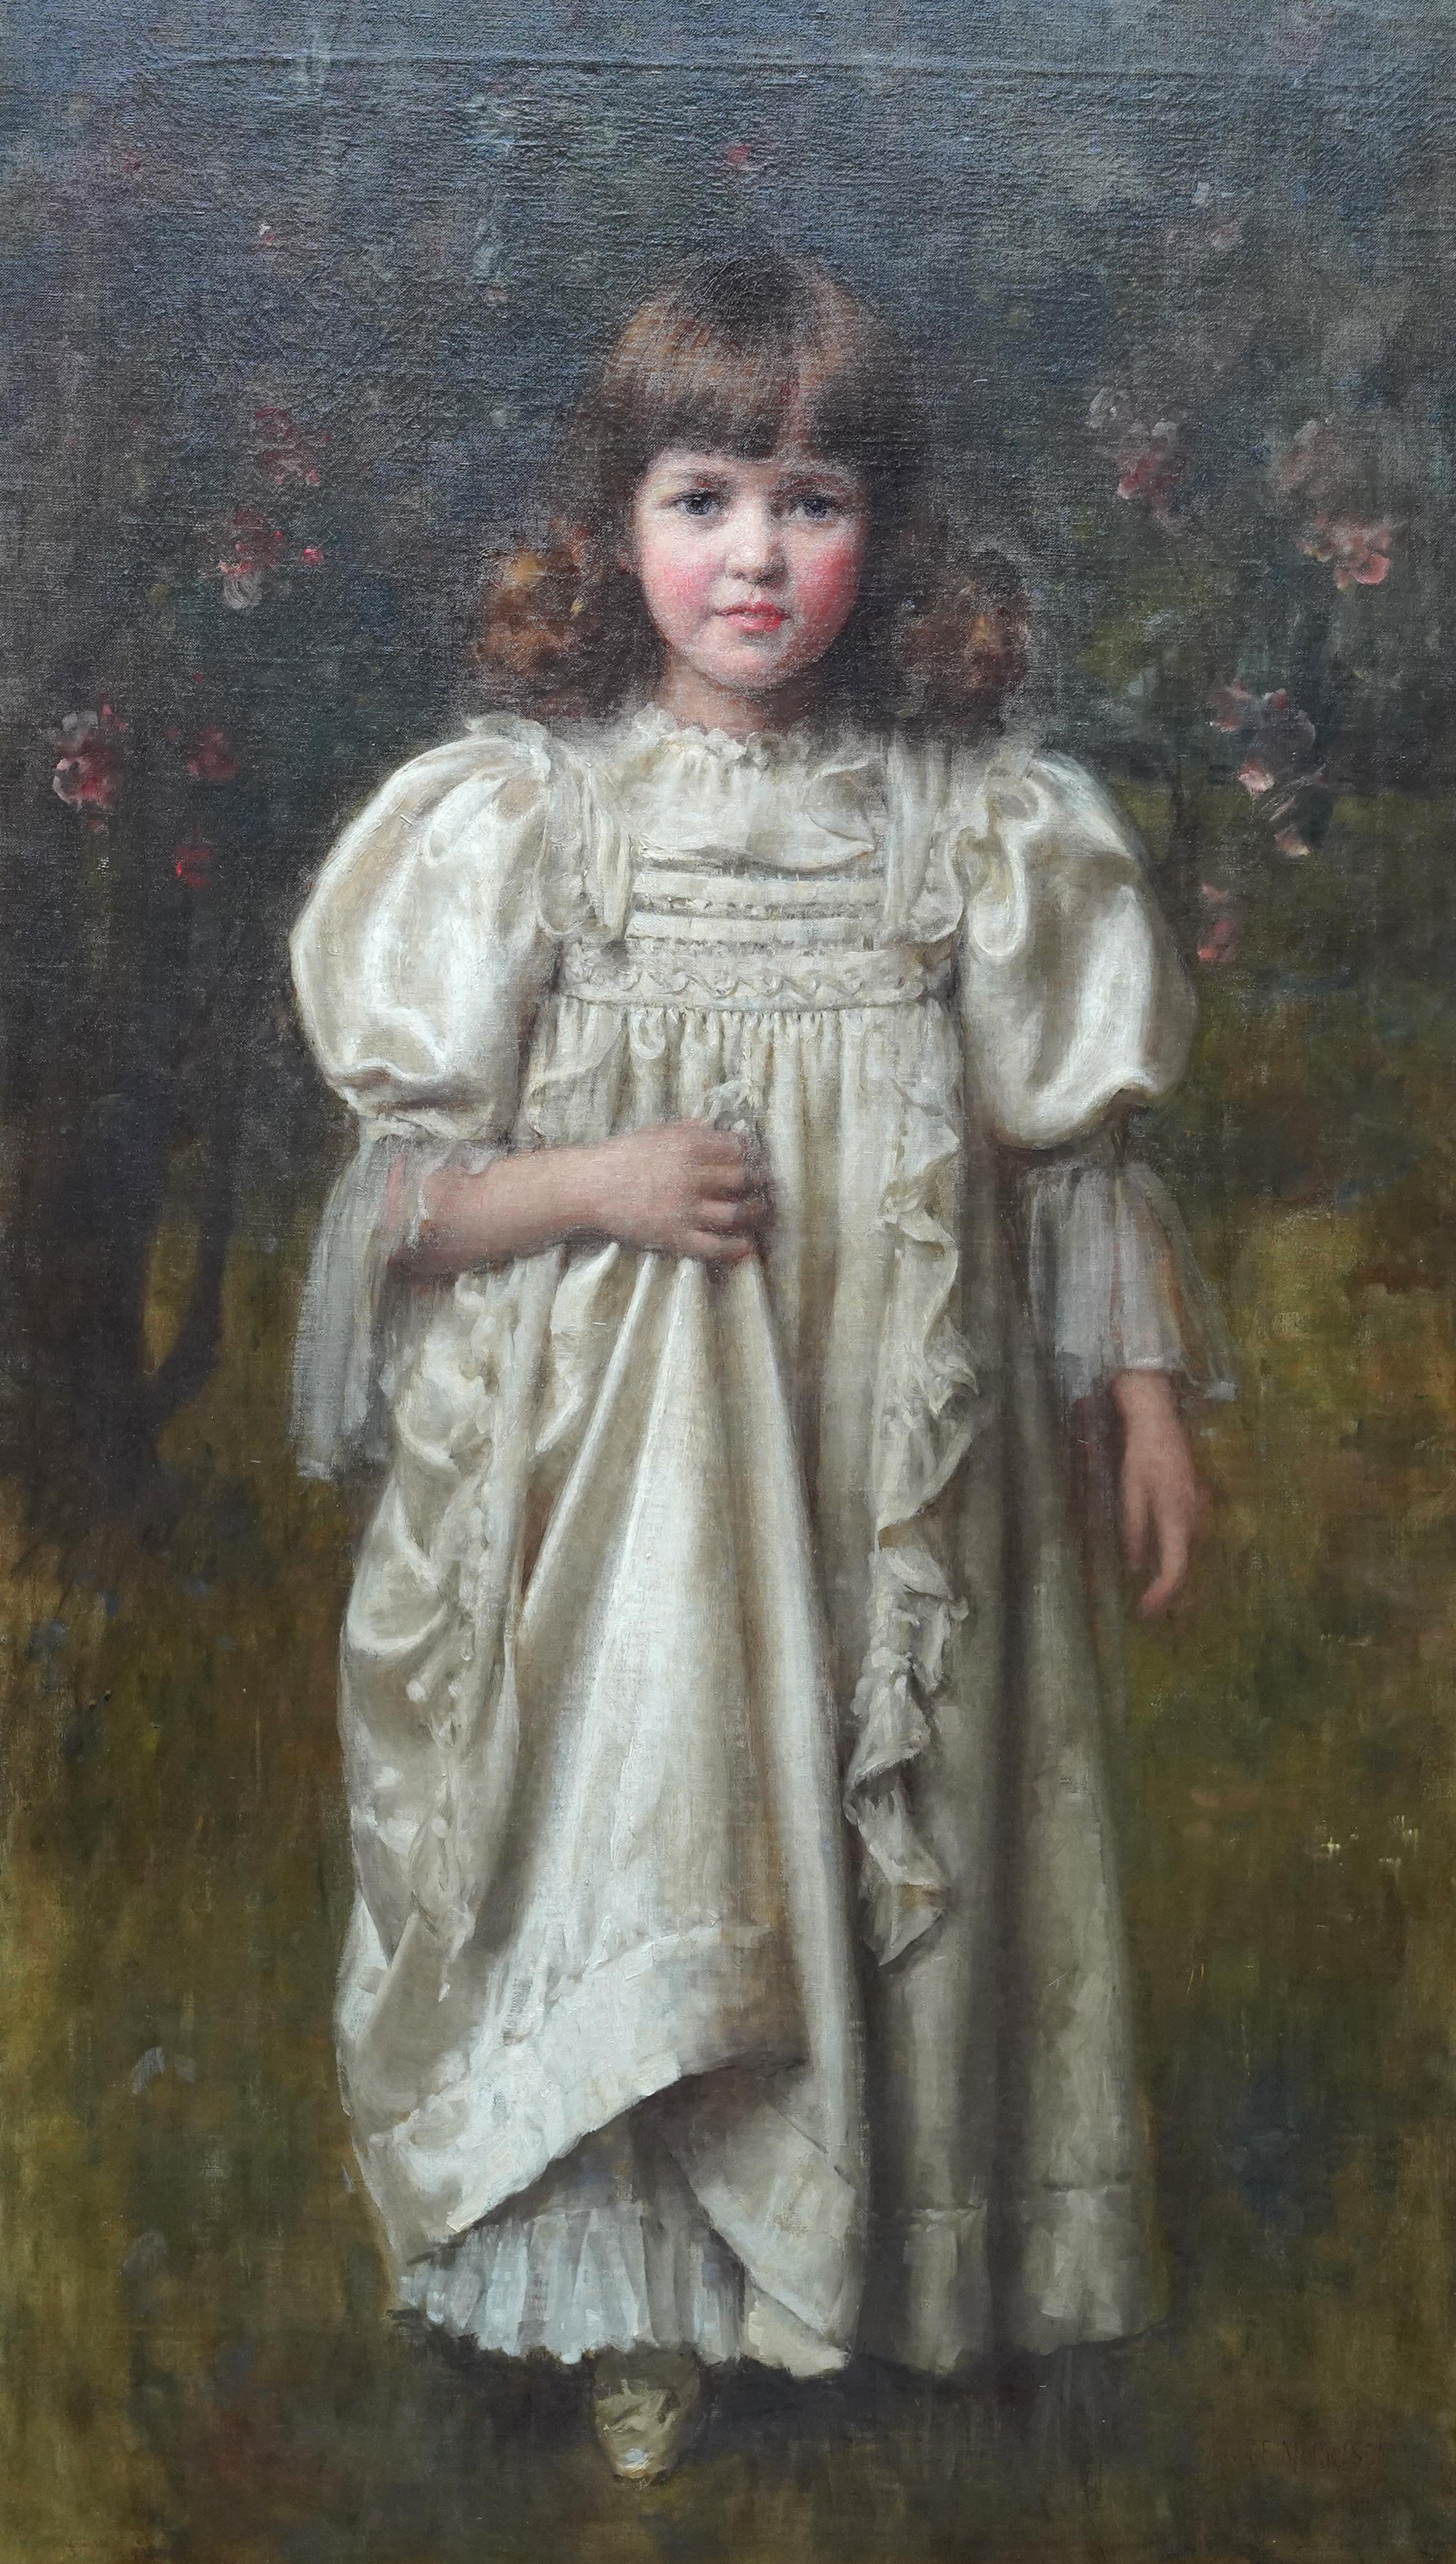 Portrait of a Young Girl in a White Dress - British Edwardian art oil painting - Painting by Robert Edward Morrison